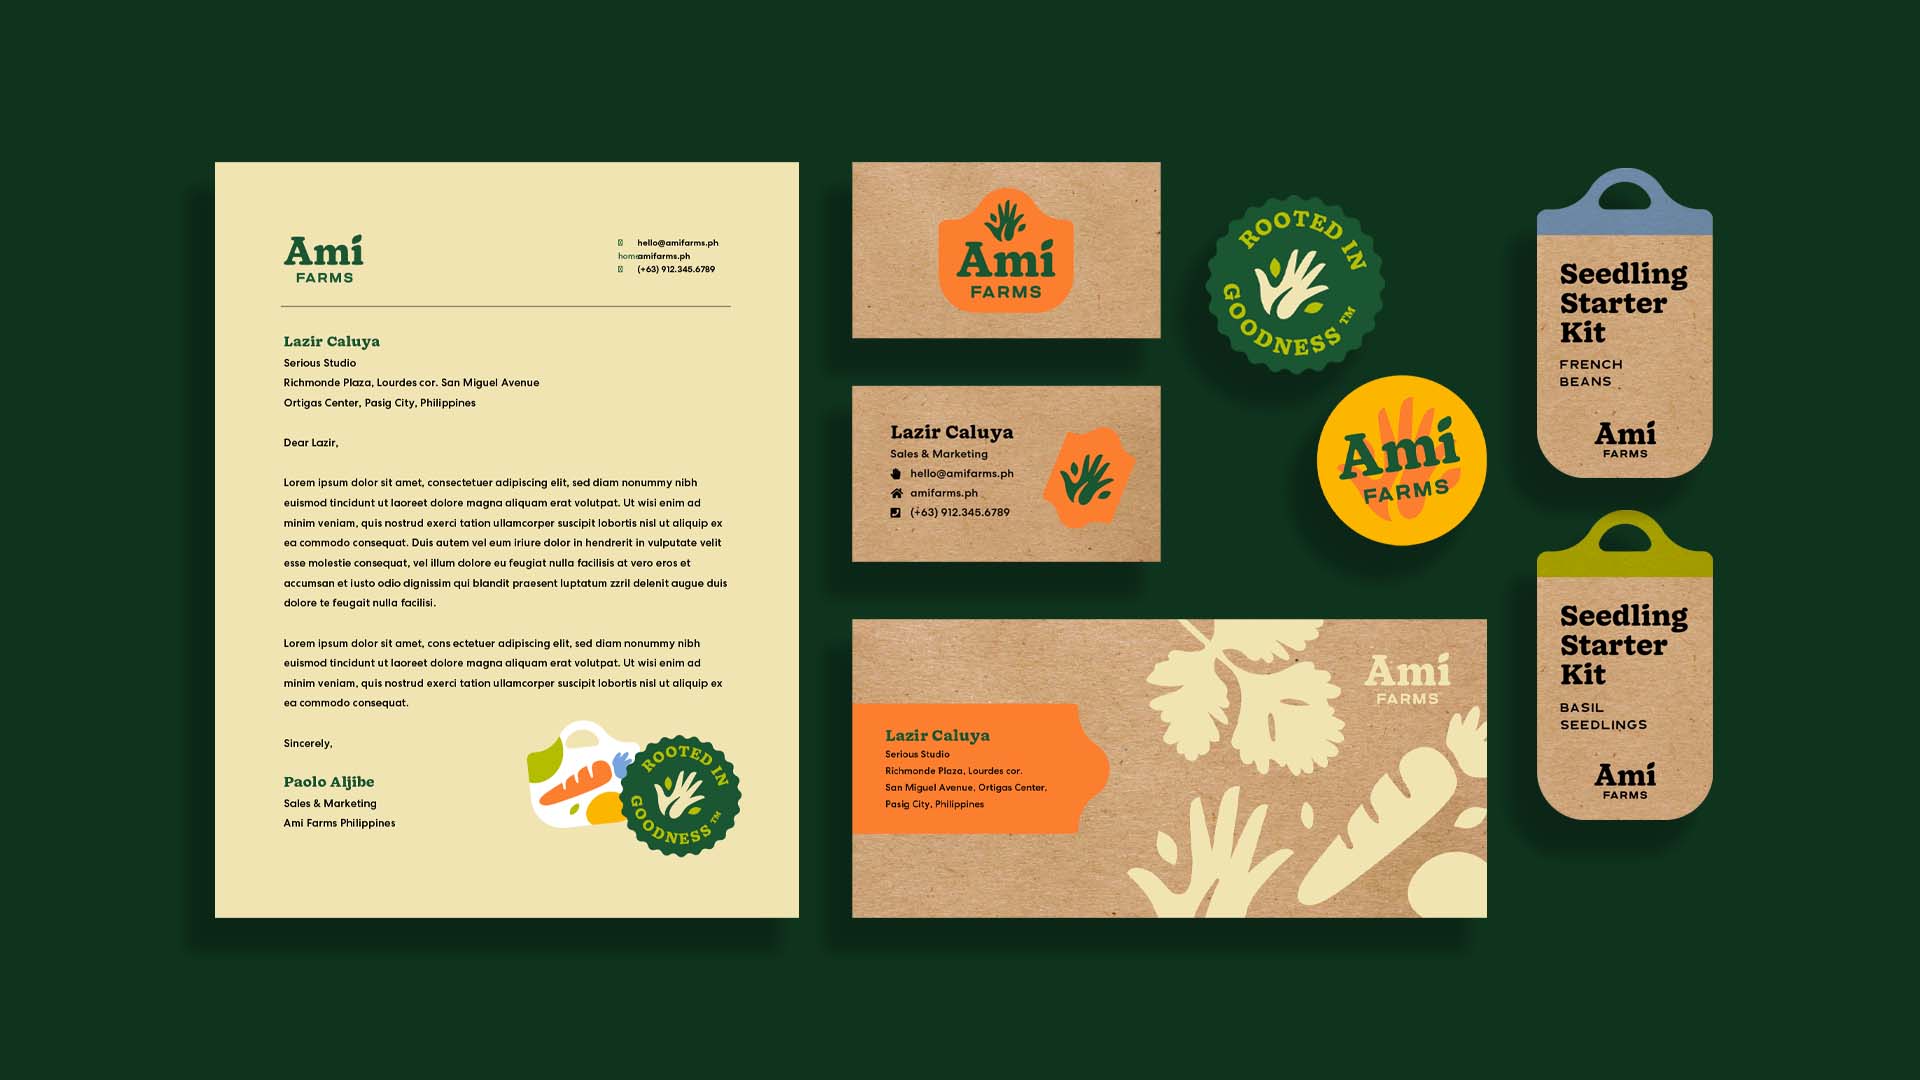 Fun and friendly branding mocked up on printed collaterals for Philippine-based Ami Farms